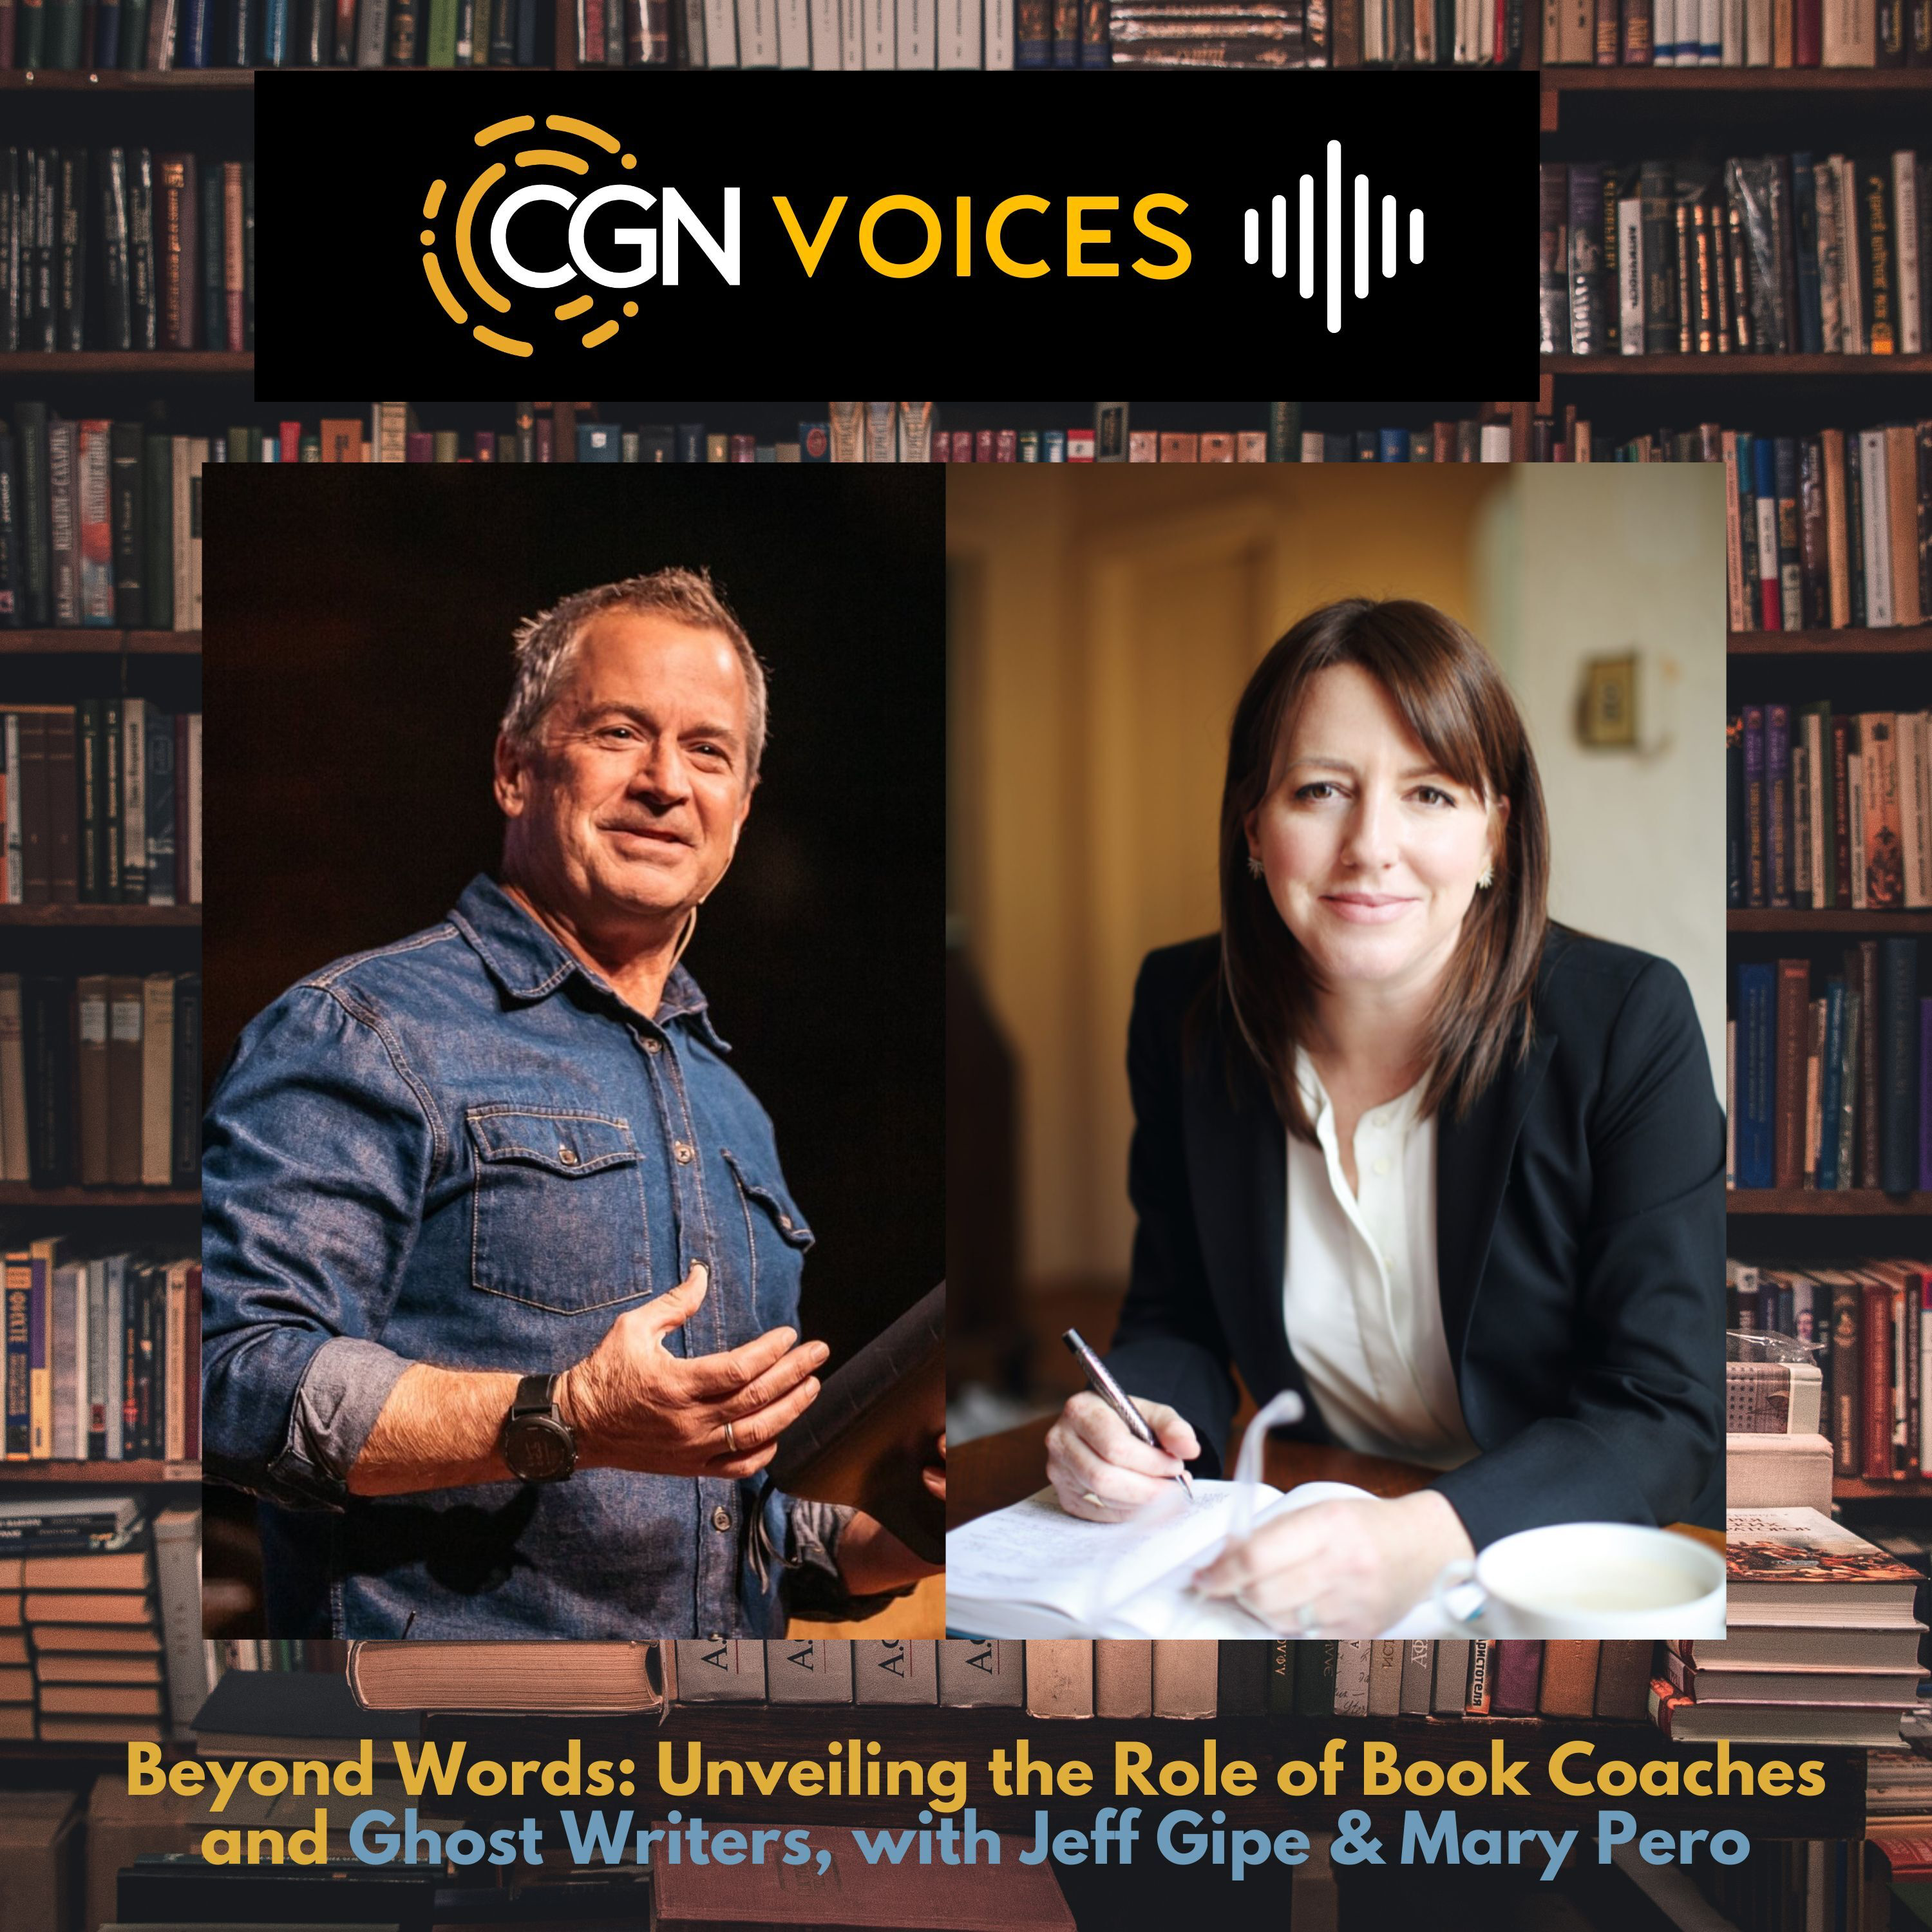 Beyond Words: Unveiling the Role of Book Coaches and Ghost Writers